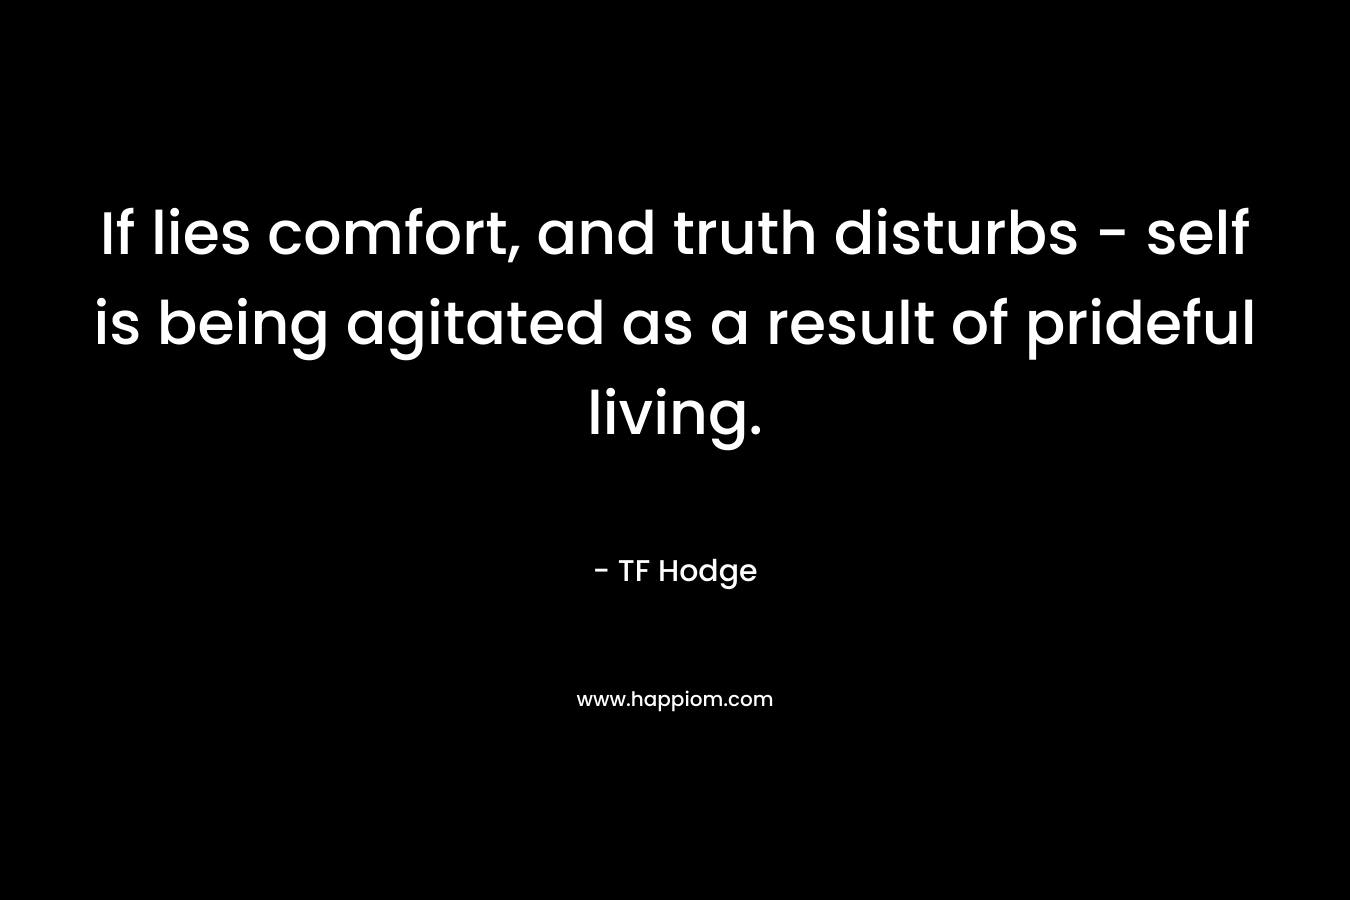 If lies comfort, and truth disturbs - self is being agitated as a result of prideful living.